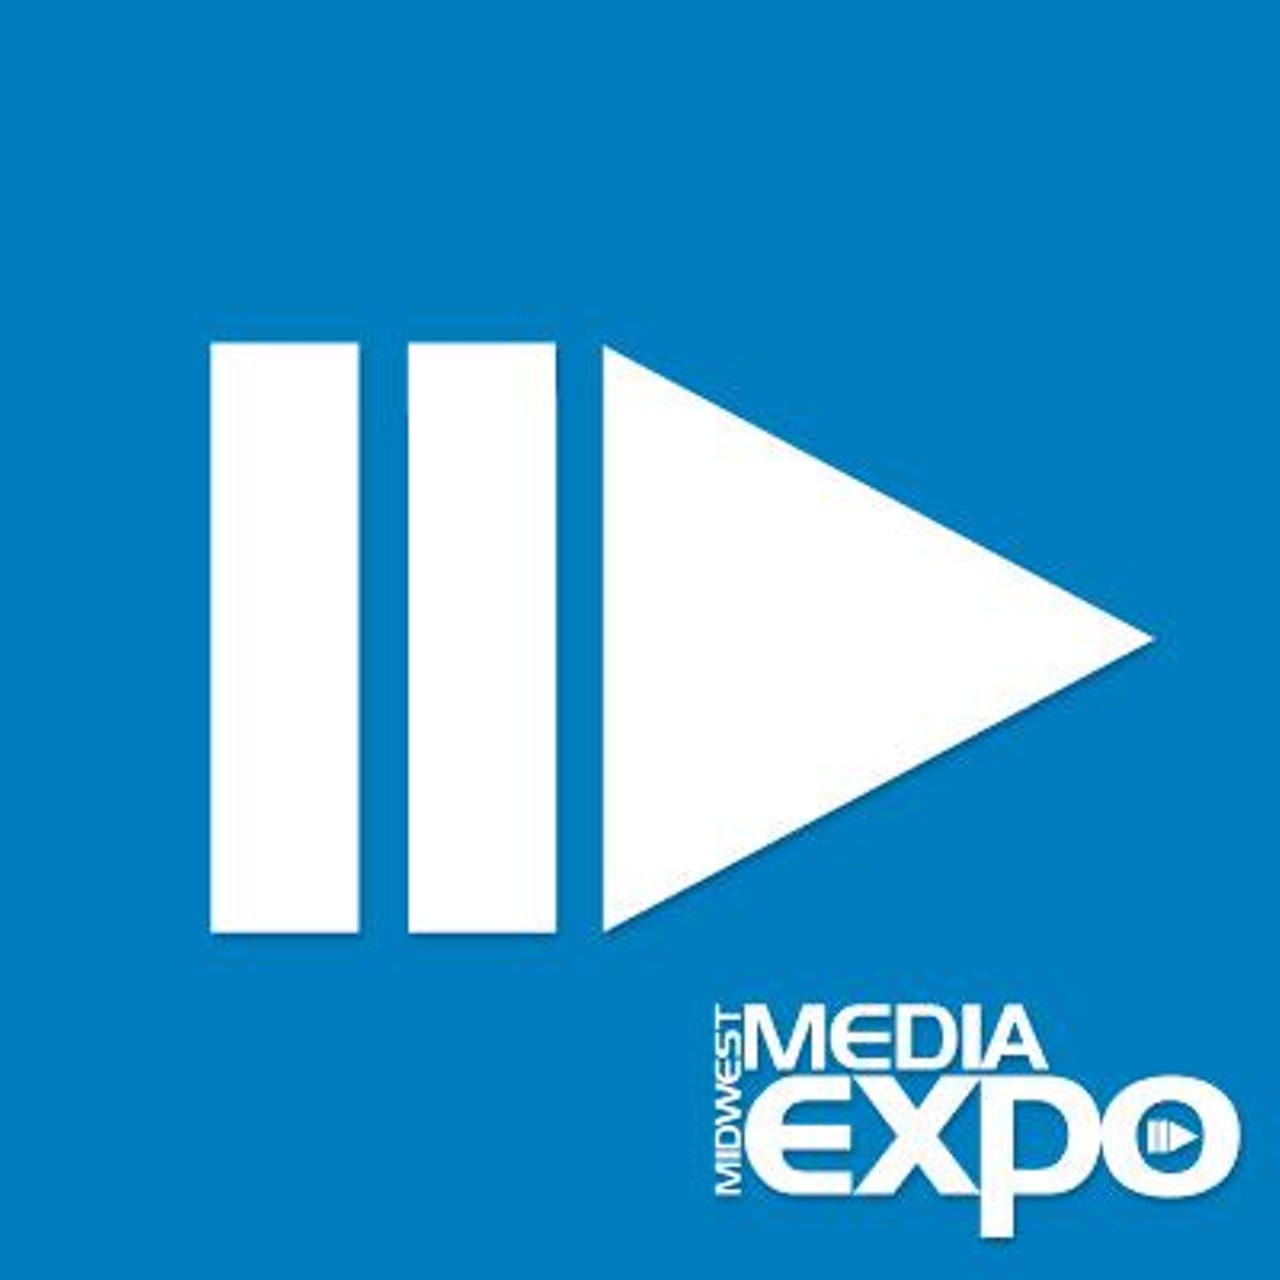 Going on 4 years, Midwest Media Expo continues to bring the exciting guests and fun atmosphere. Futurama fans will be happy to see Billy West and Maurice Lamarche this year. Runs April 28-30.
Photo via Midwest Media Expo Facebook page